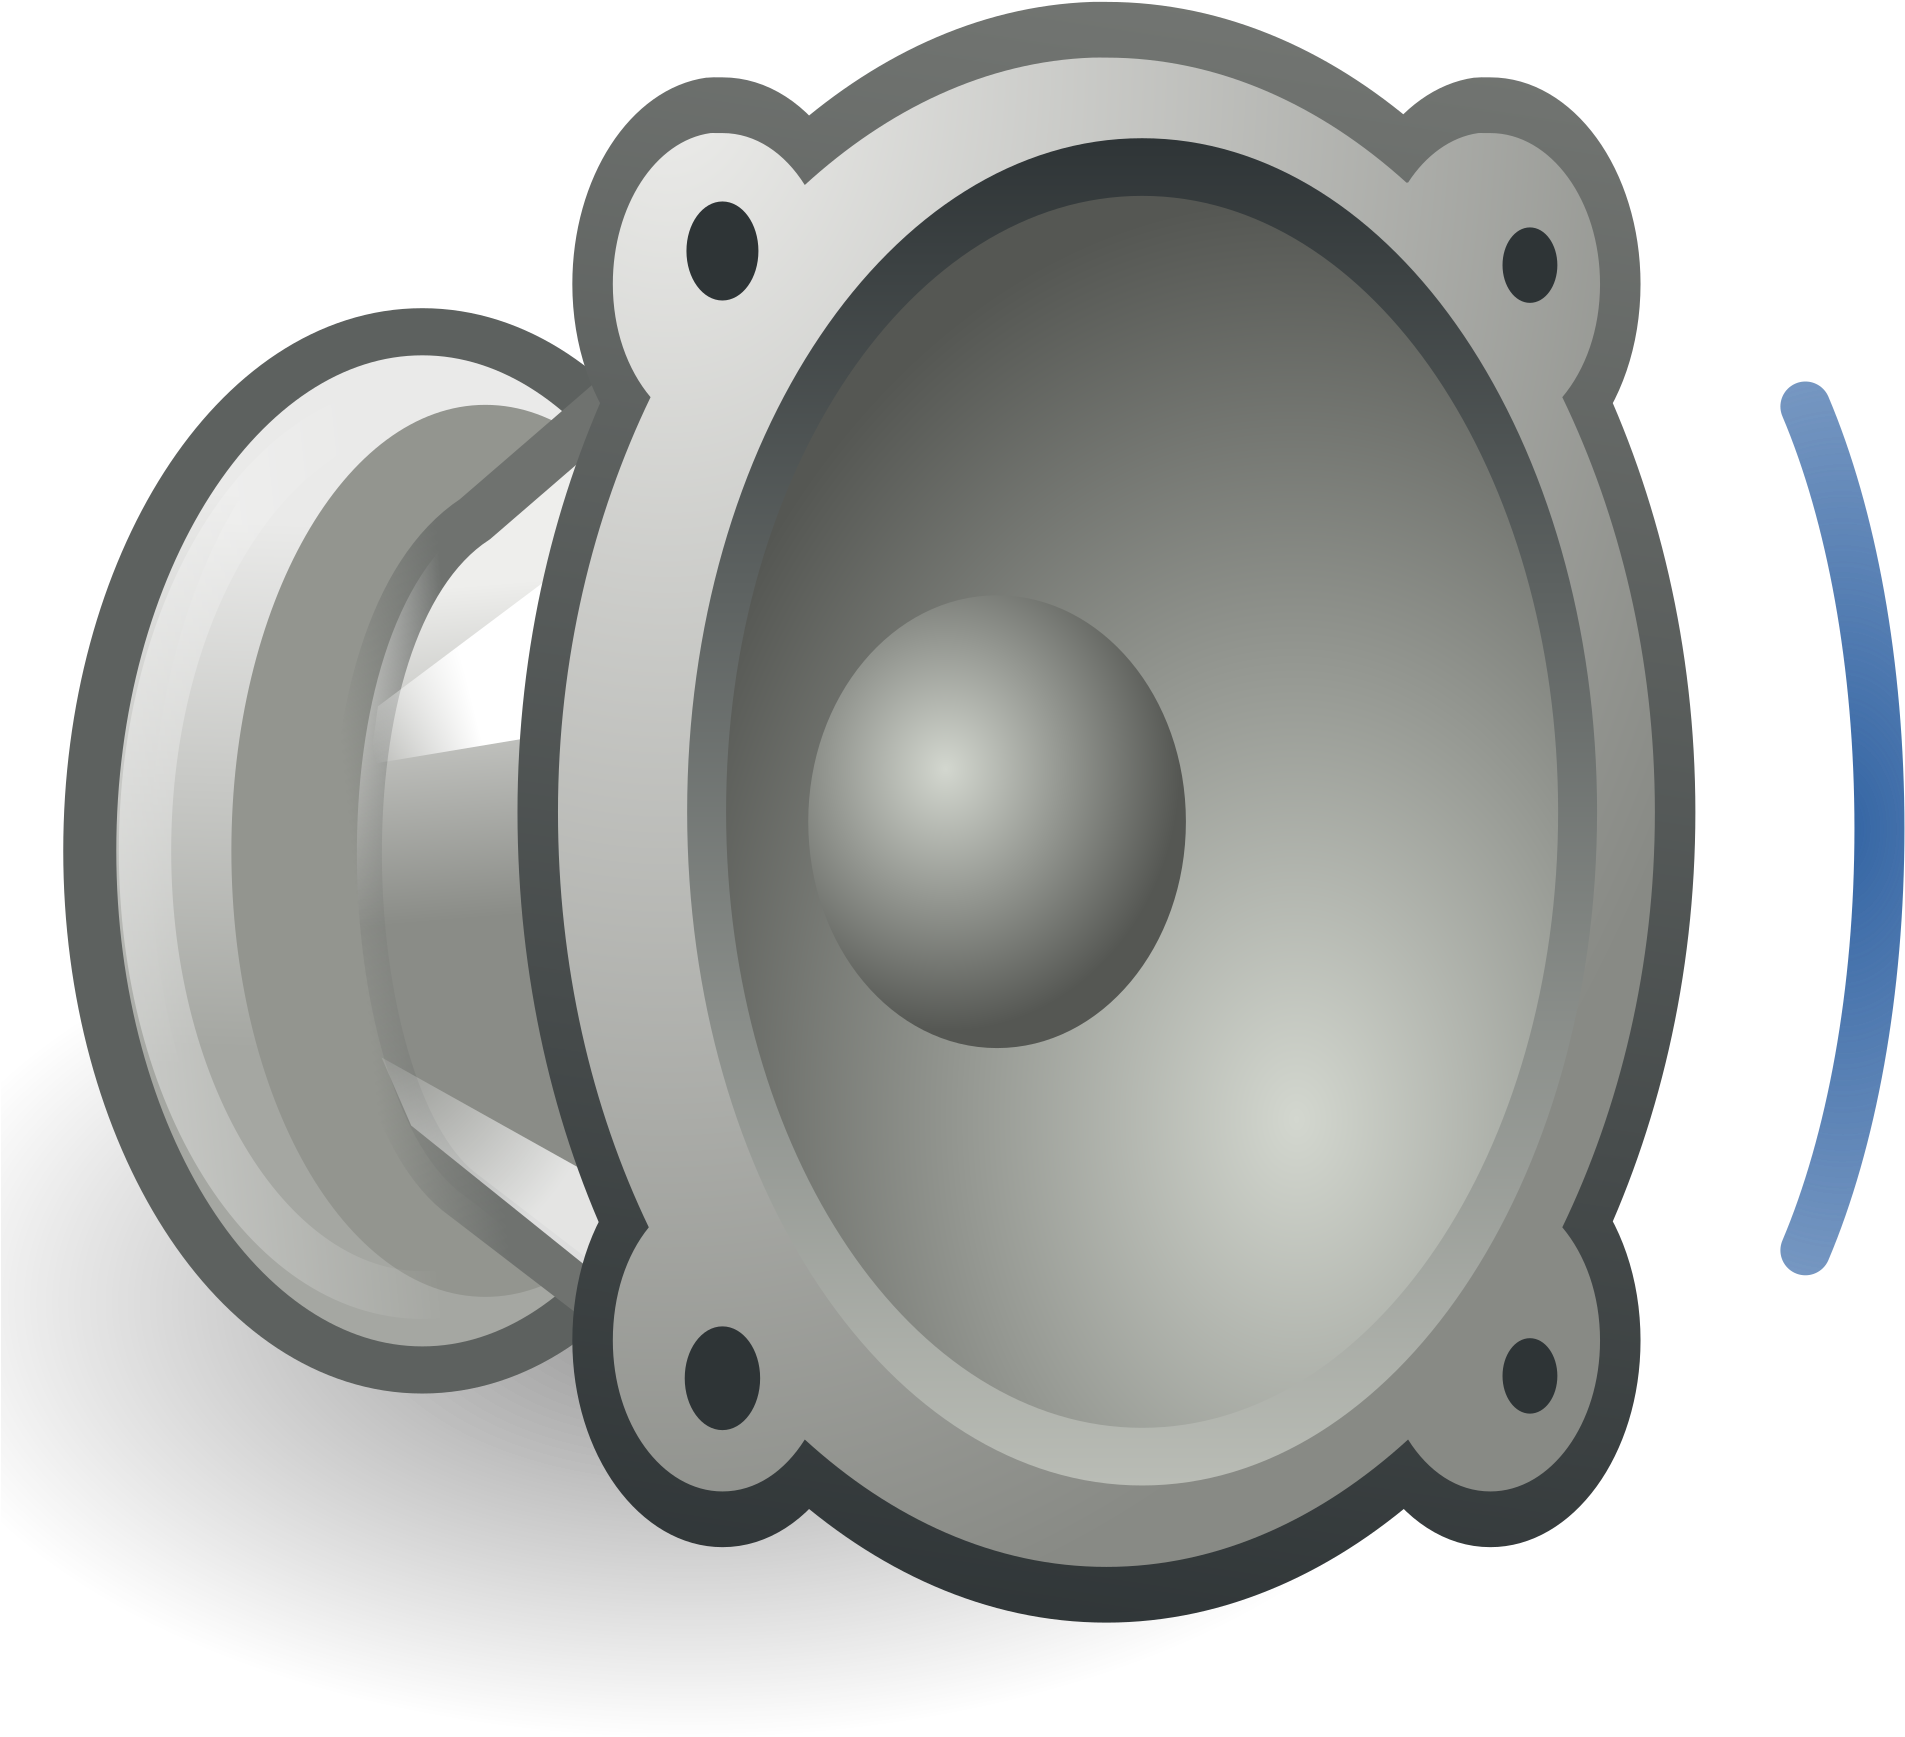 A White Speaker With Blue And Black Background